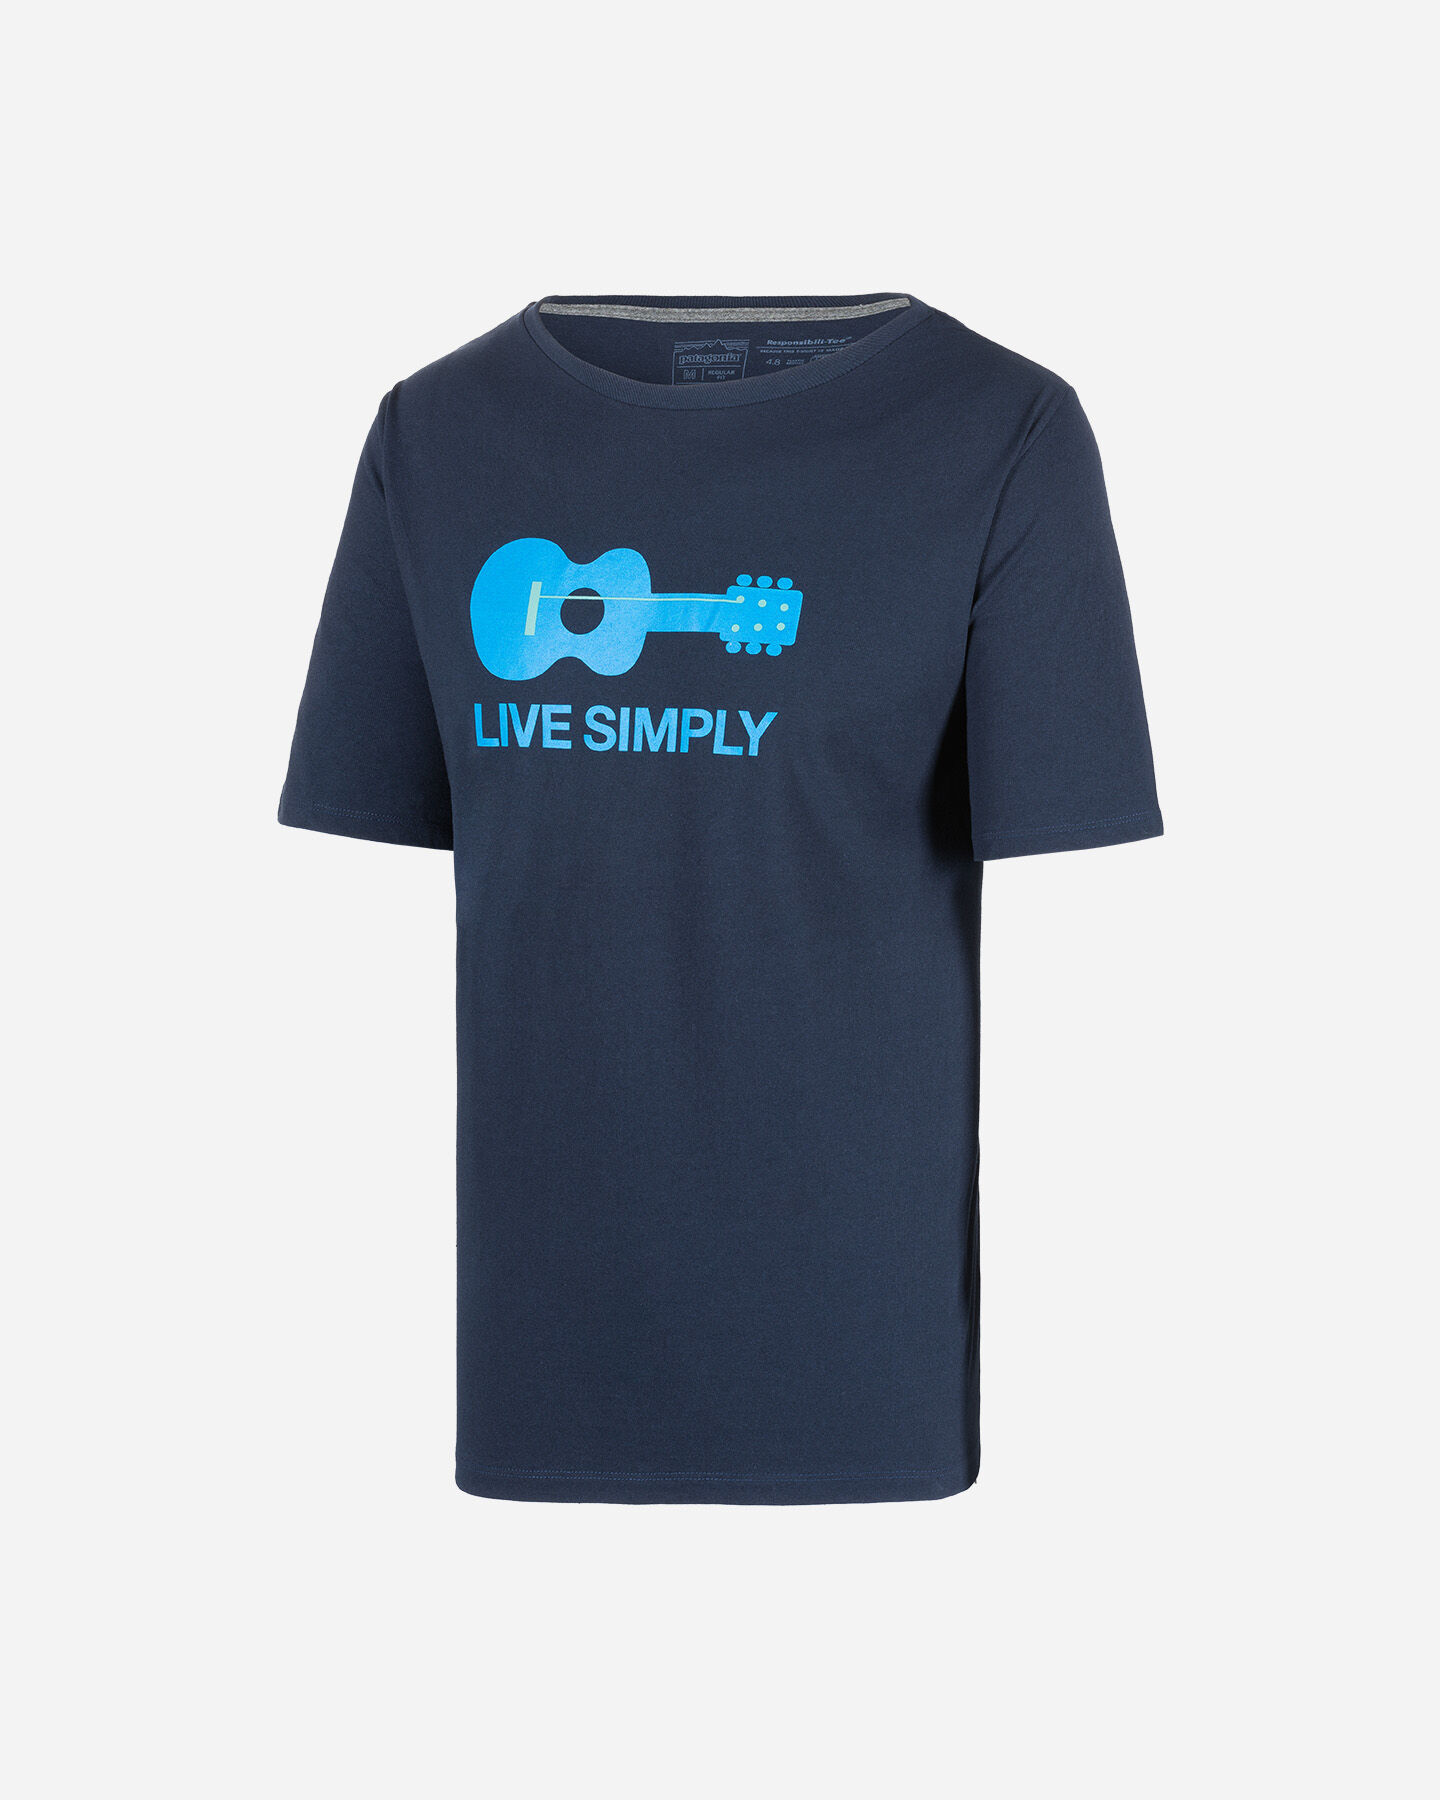  T-Shirt PATAGONIA LIVE SIMPLY GUITAR M S4077575|1|S scatto 0